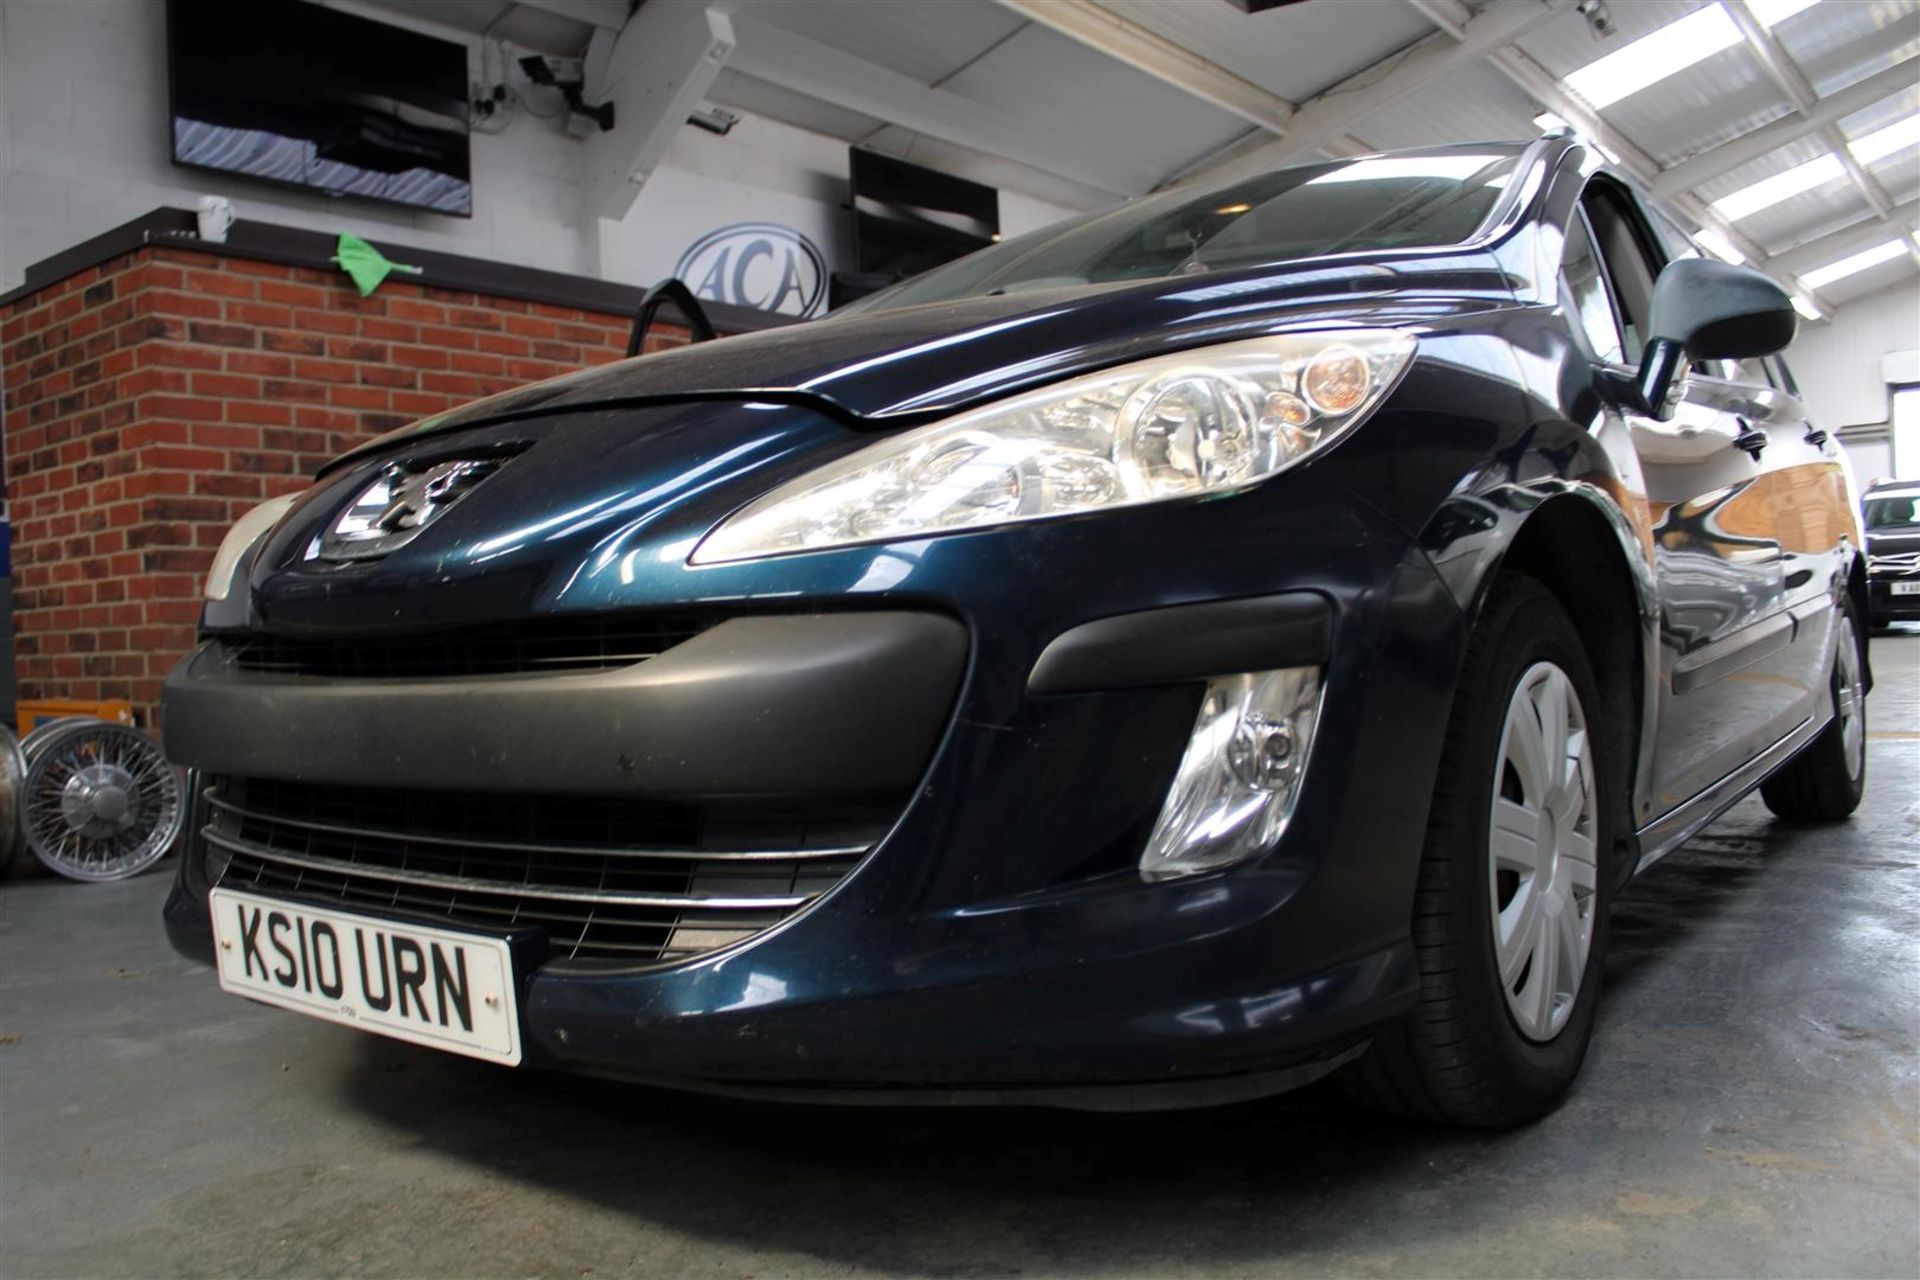 10 10 Peugeot 308 S SW HDI 89 - Image 6 of 37